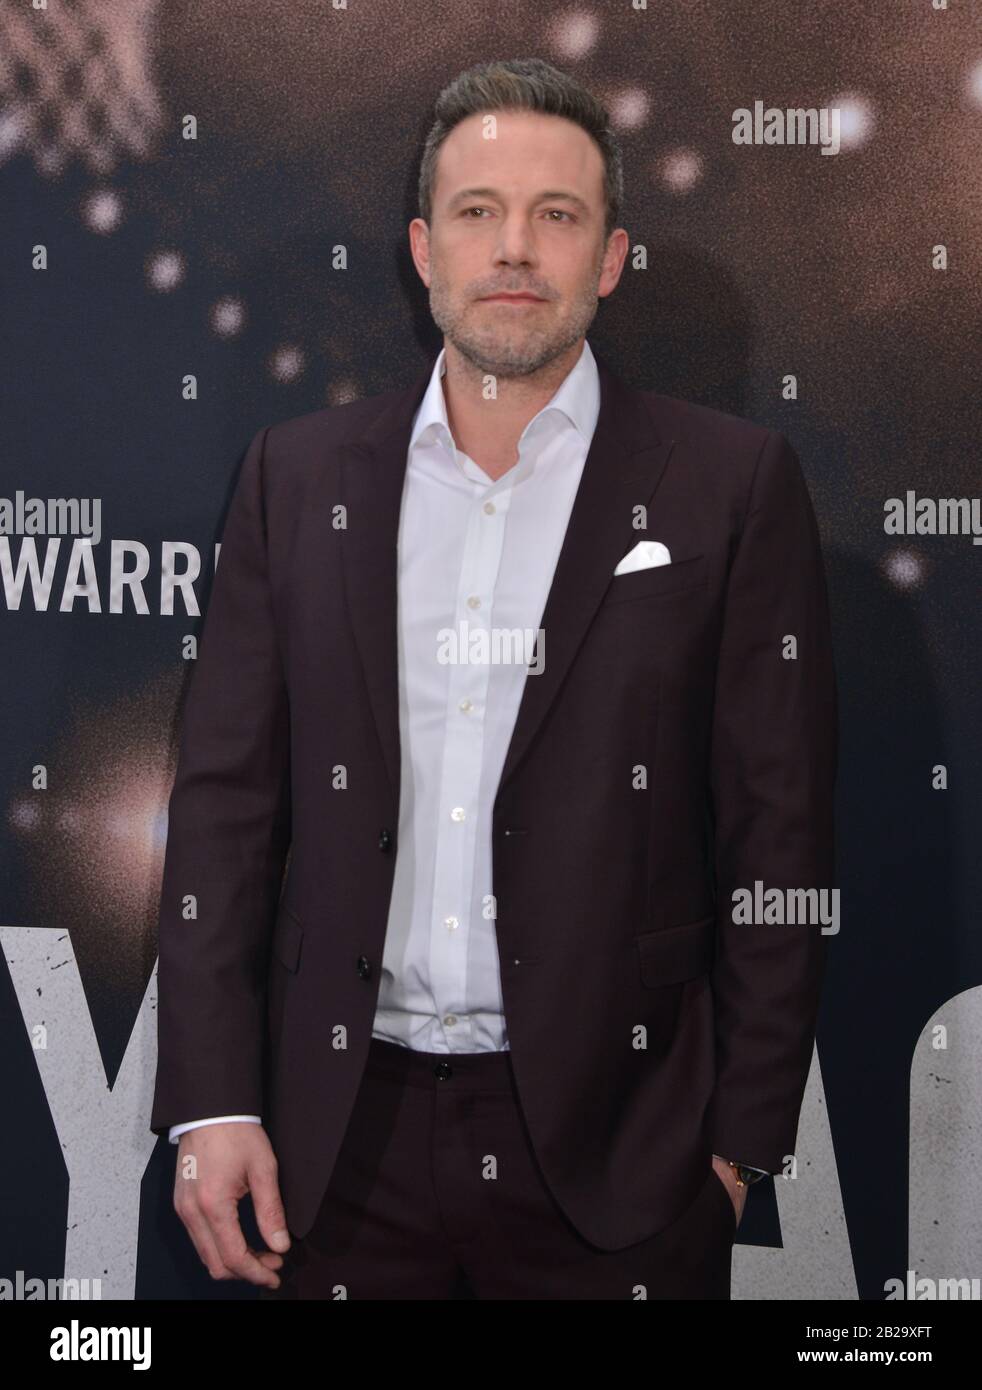 Los Angeles, USA. 01st Mar, 2020. Ben Affleck 019 attend the premiere of Warner Bros Pictures' ' The Way Back' at Regal LA Live on March 01, 2020 in Los Angeles, California. Credit: Tsuni/USA/Alamy Live News Stock Photo